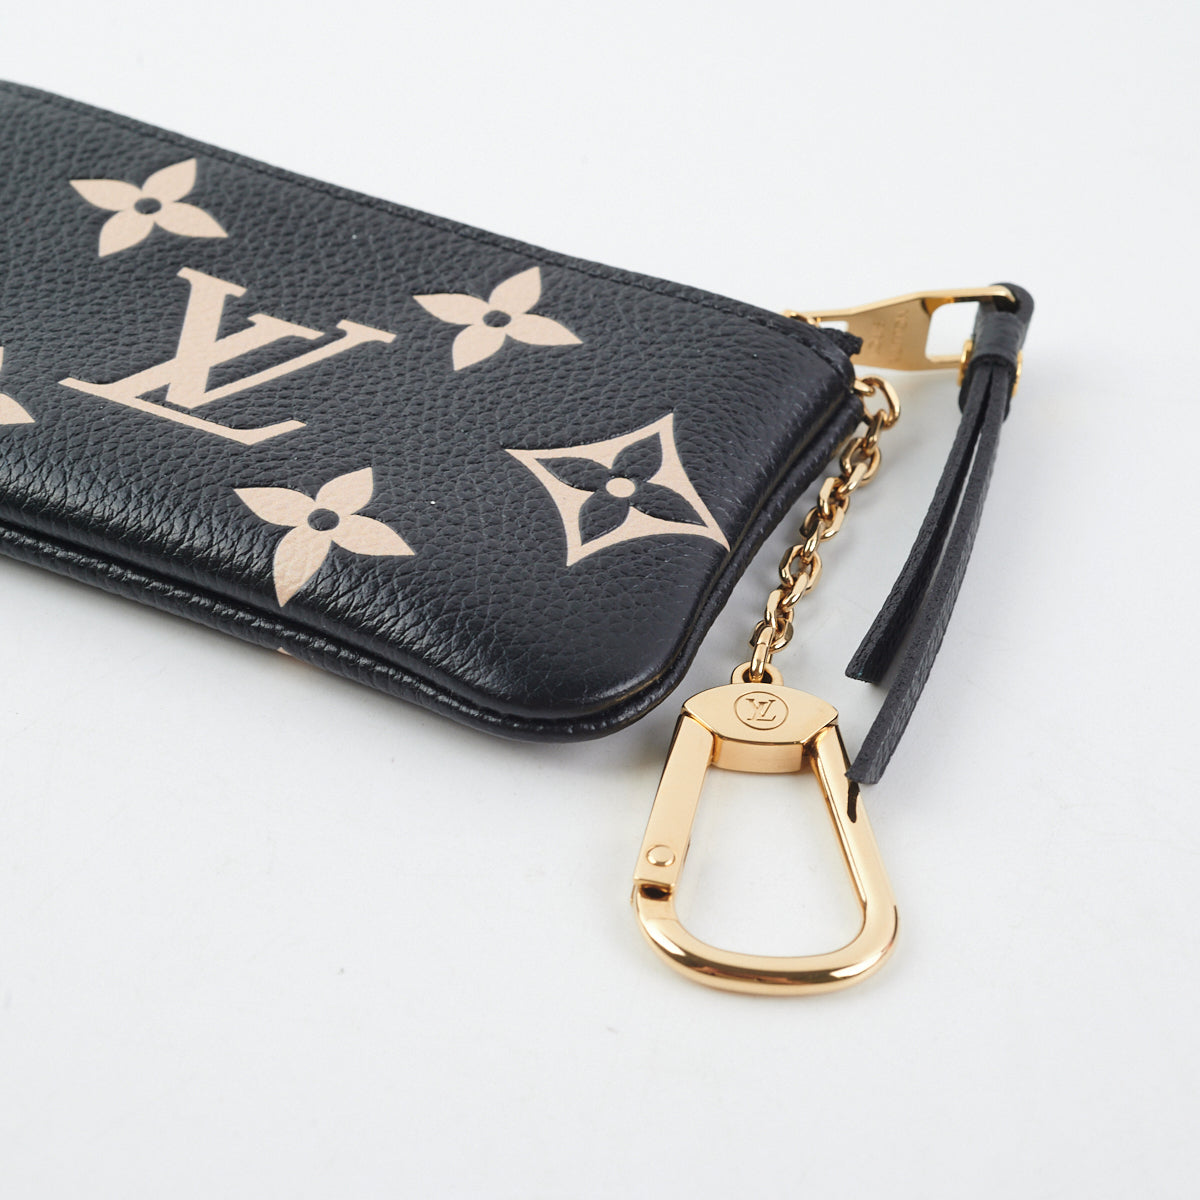 Key Pouch Monogram Empreinte Leather - Wallets and Small Leather Goods